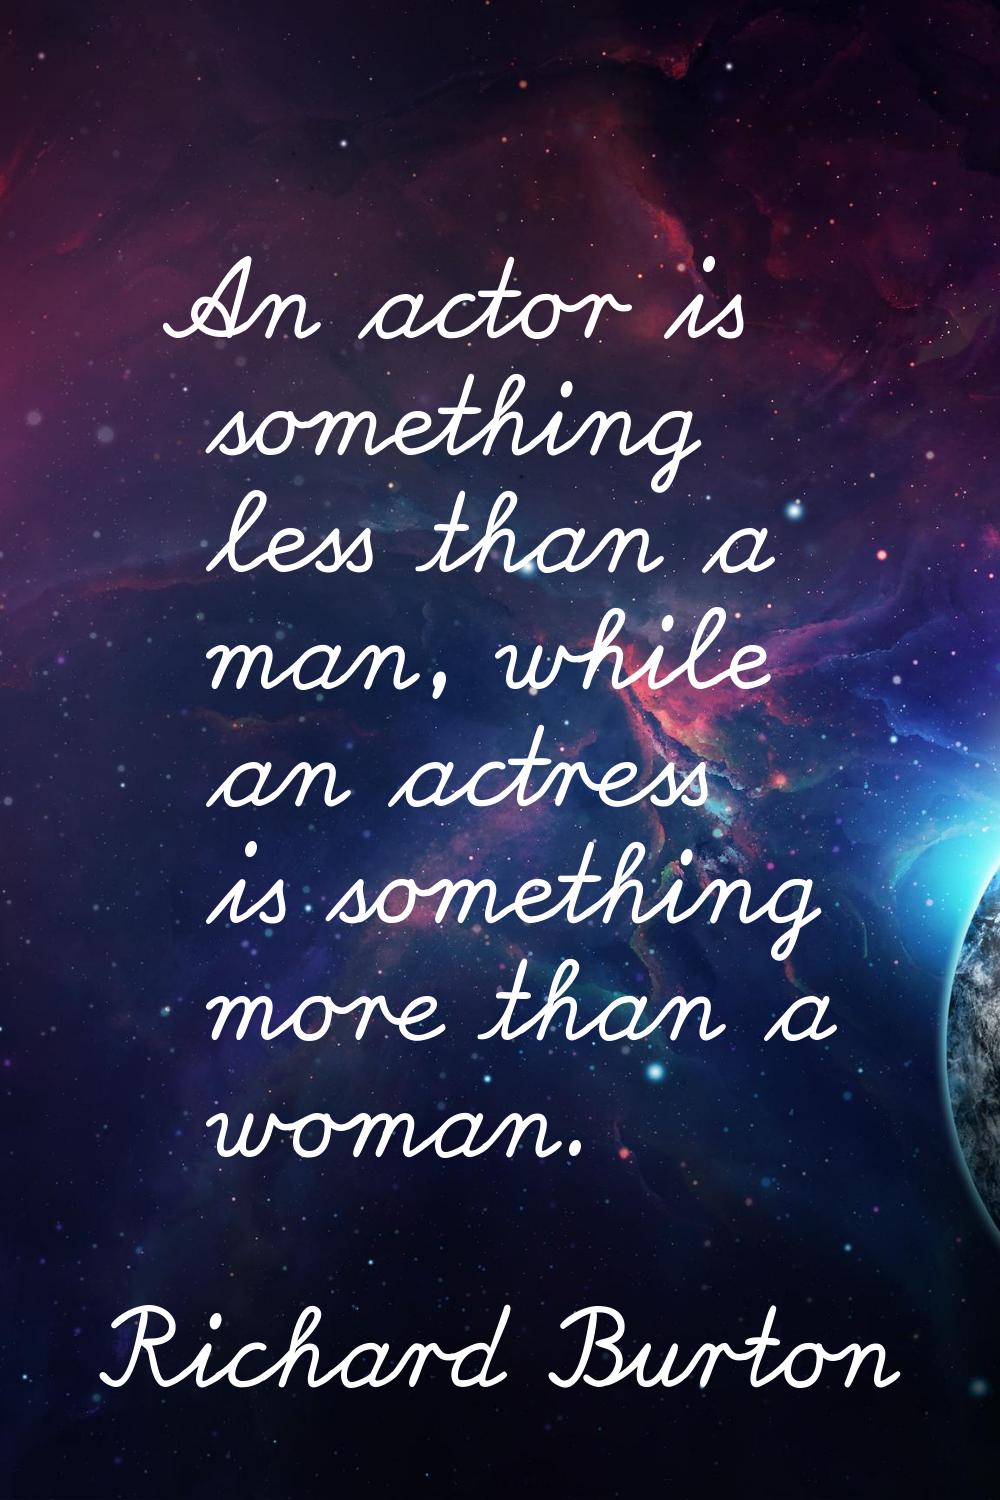 An actor is something less than a man, while an actress is something more than a woman.